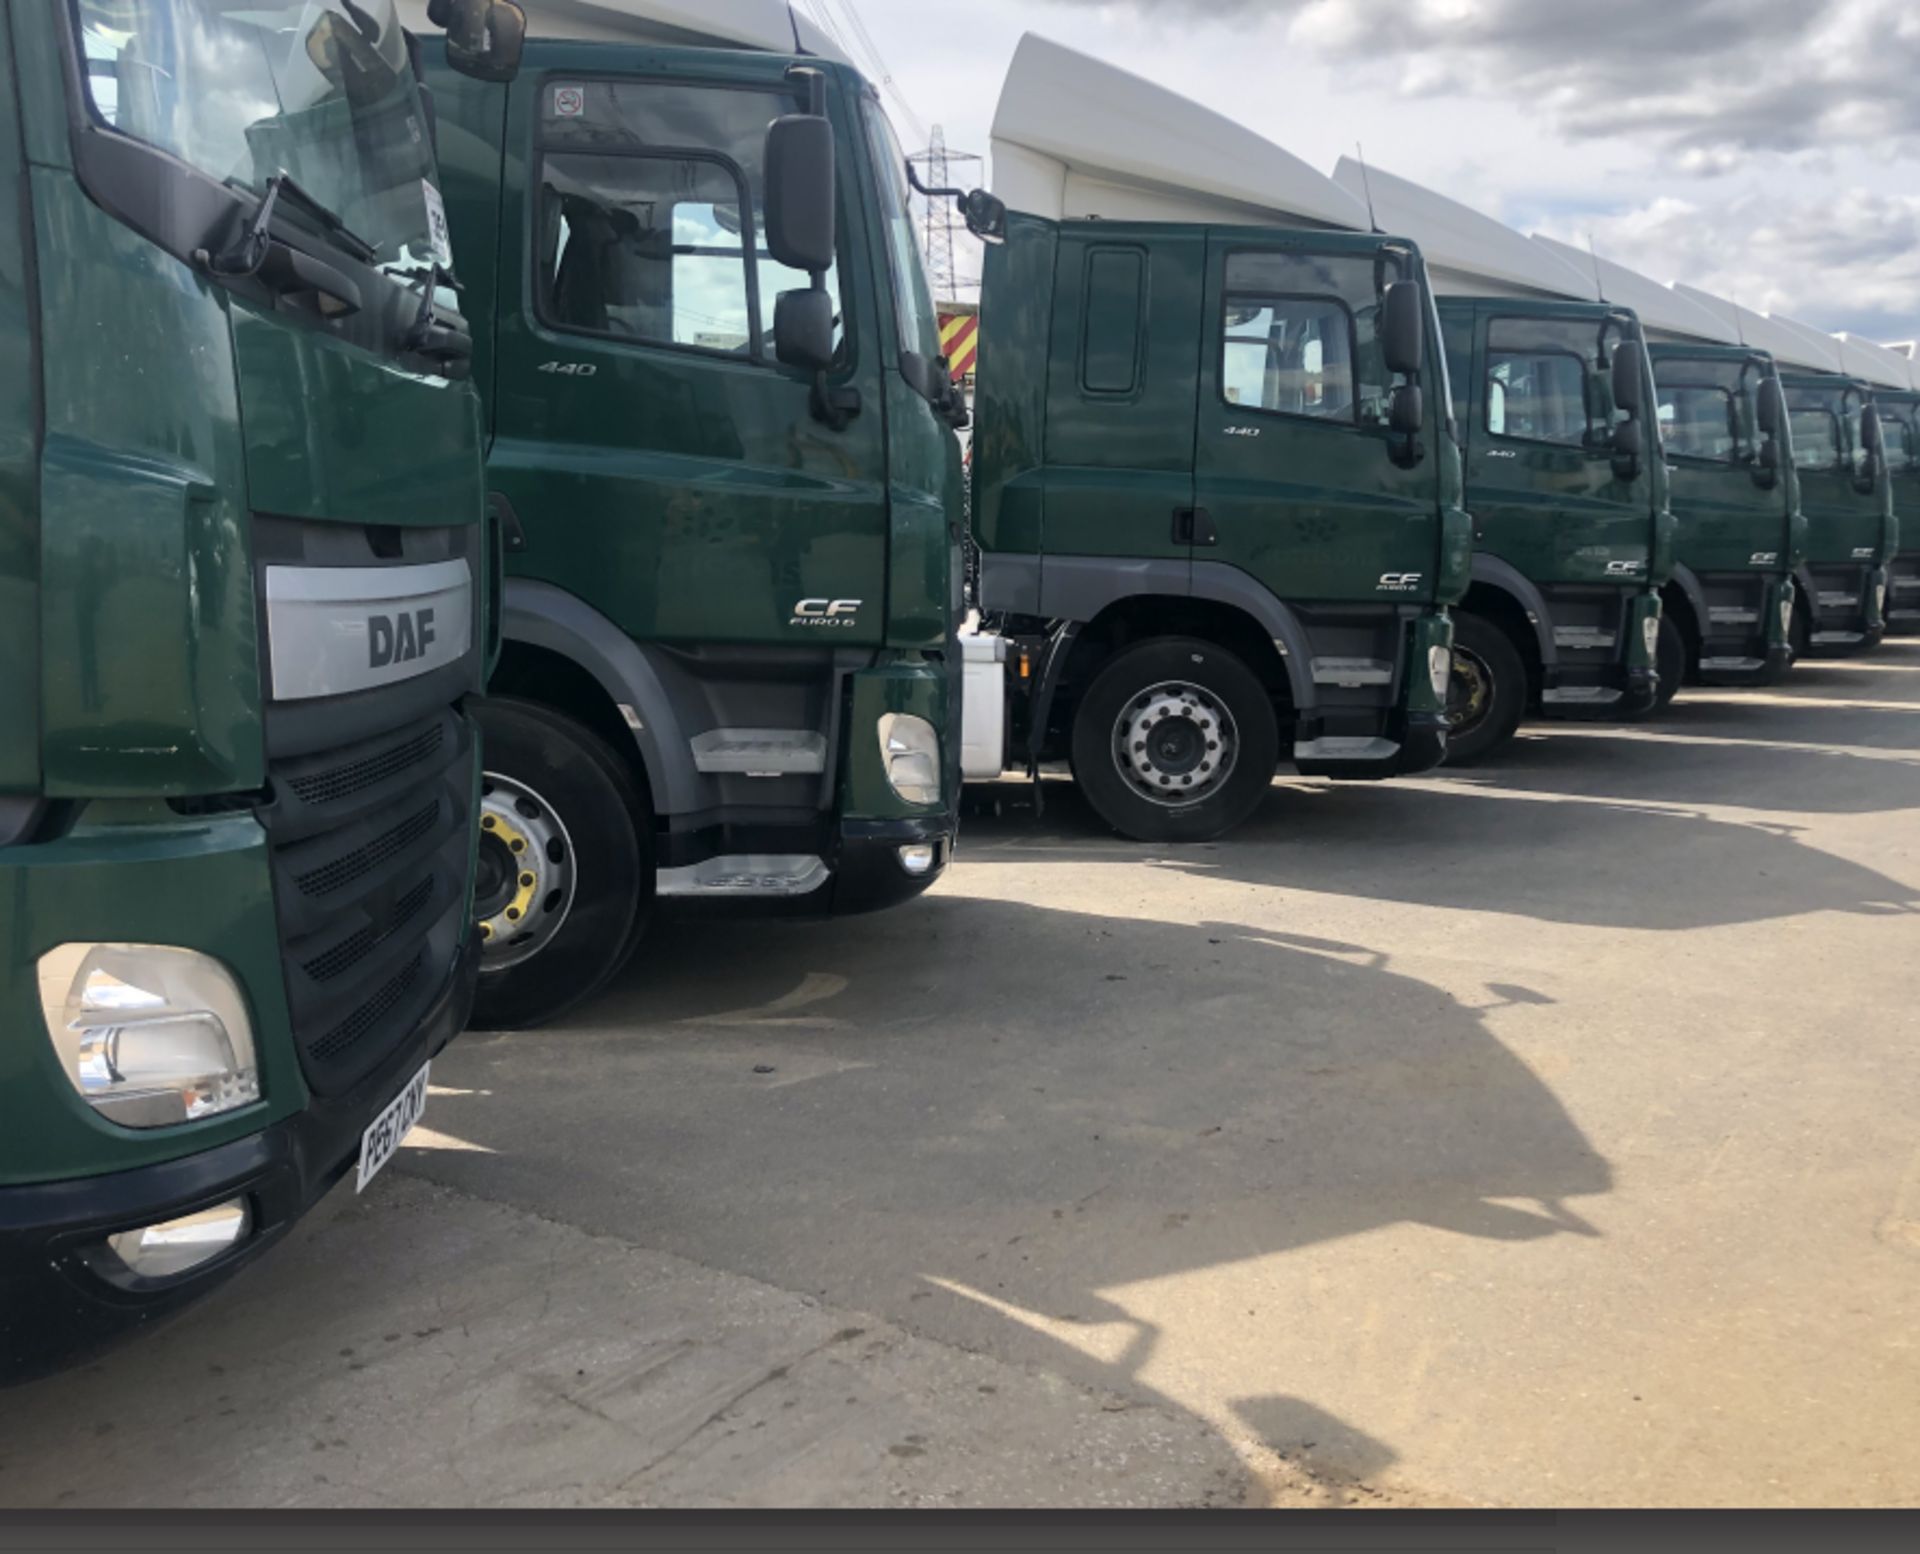 TRACTOR UNIT 2017 DAF 85 CF 6×2 - Image 9 of 10